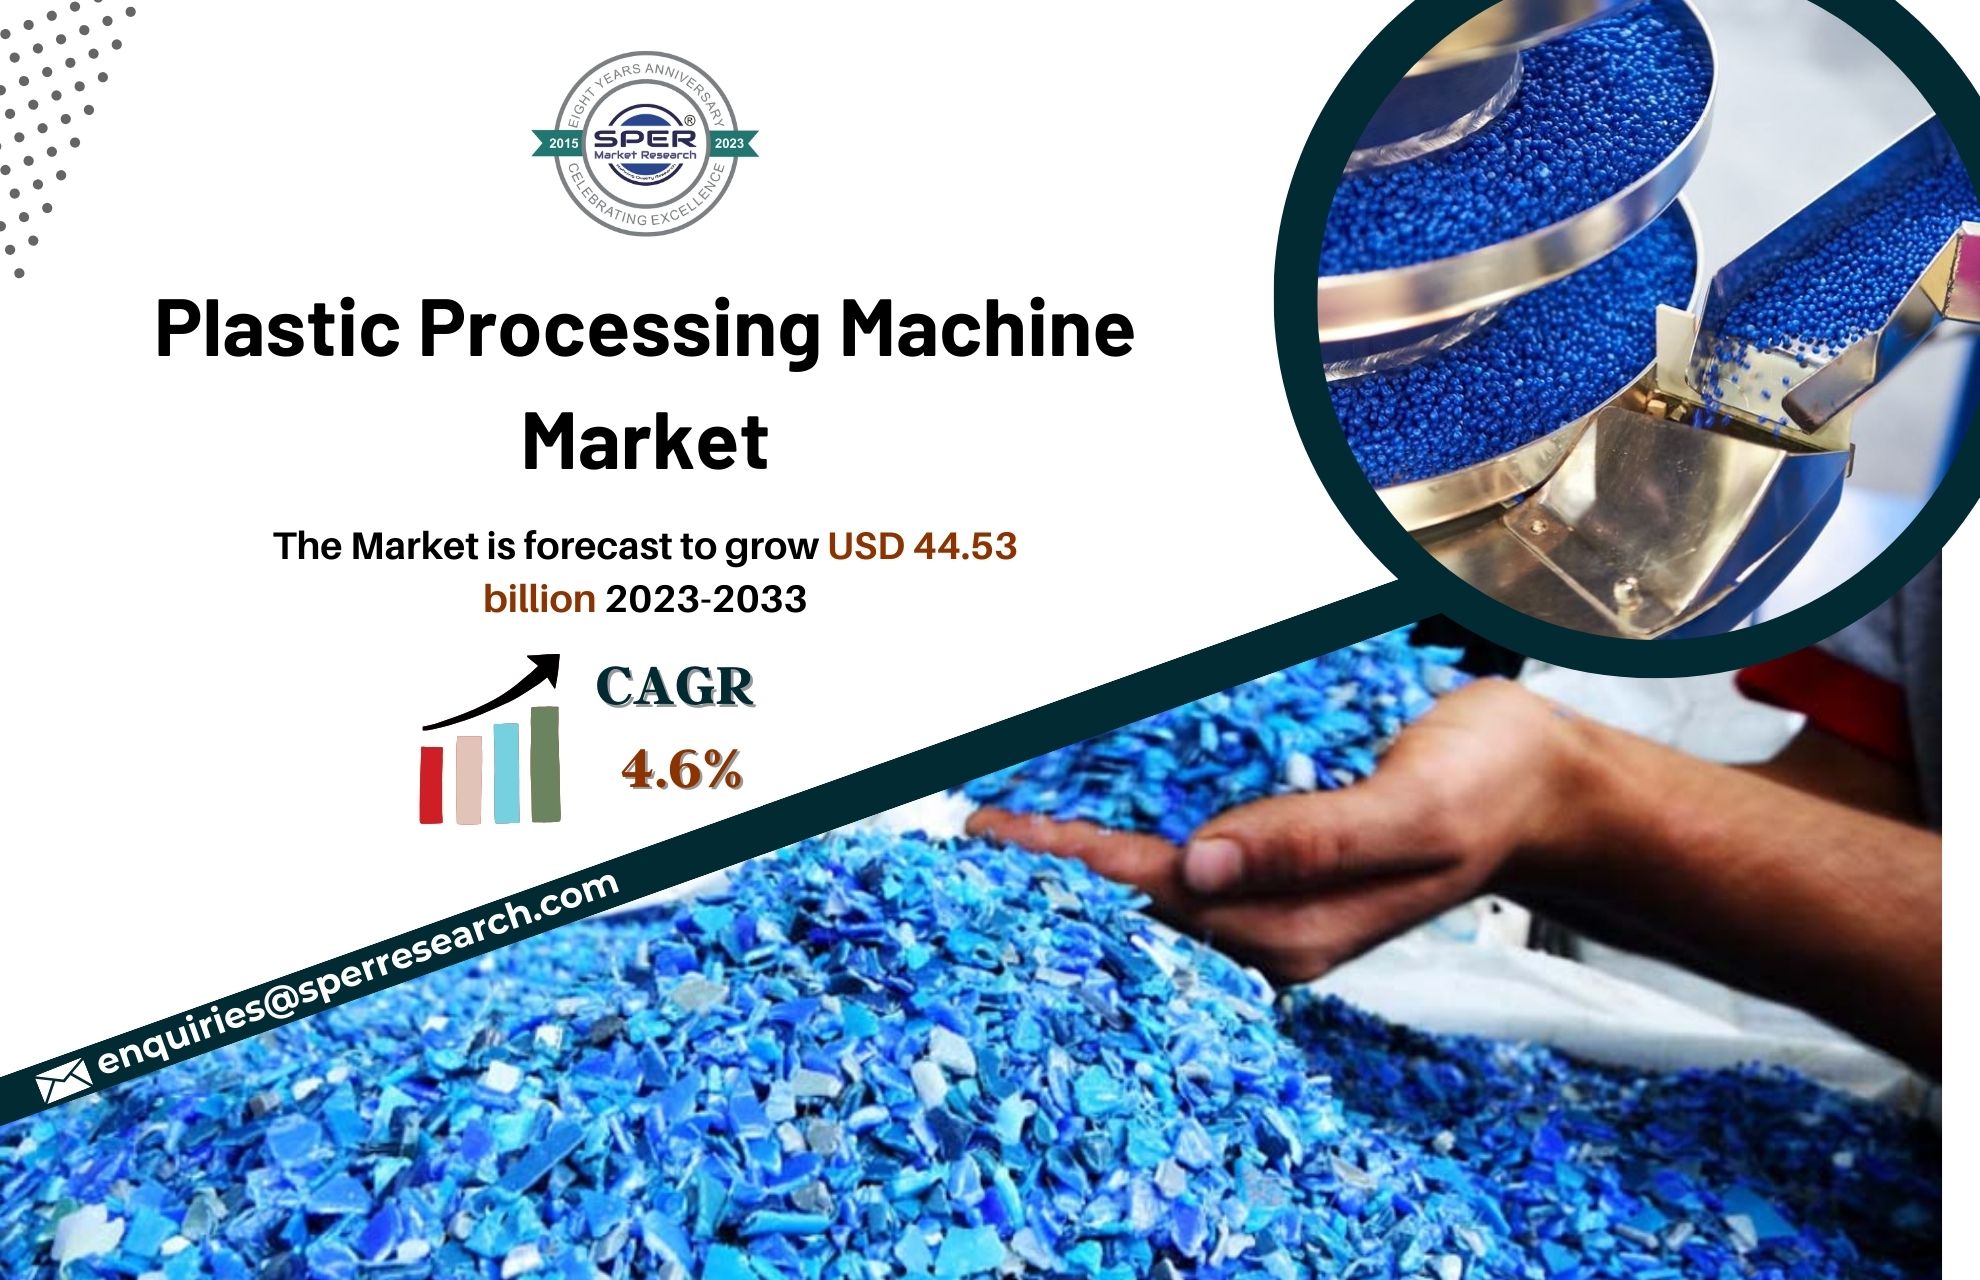 Plastic Processing Machine Market Growth, Share, Rising Trends, Revenue, Demand, Business Challenges, Opportunities, Key Manufacturers and Forecast till 2033: SPER Market Research